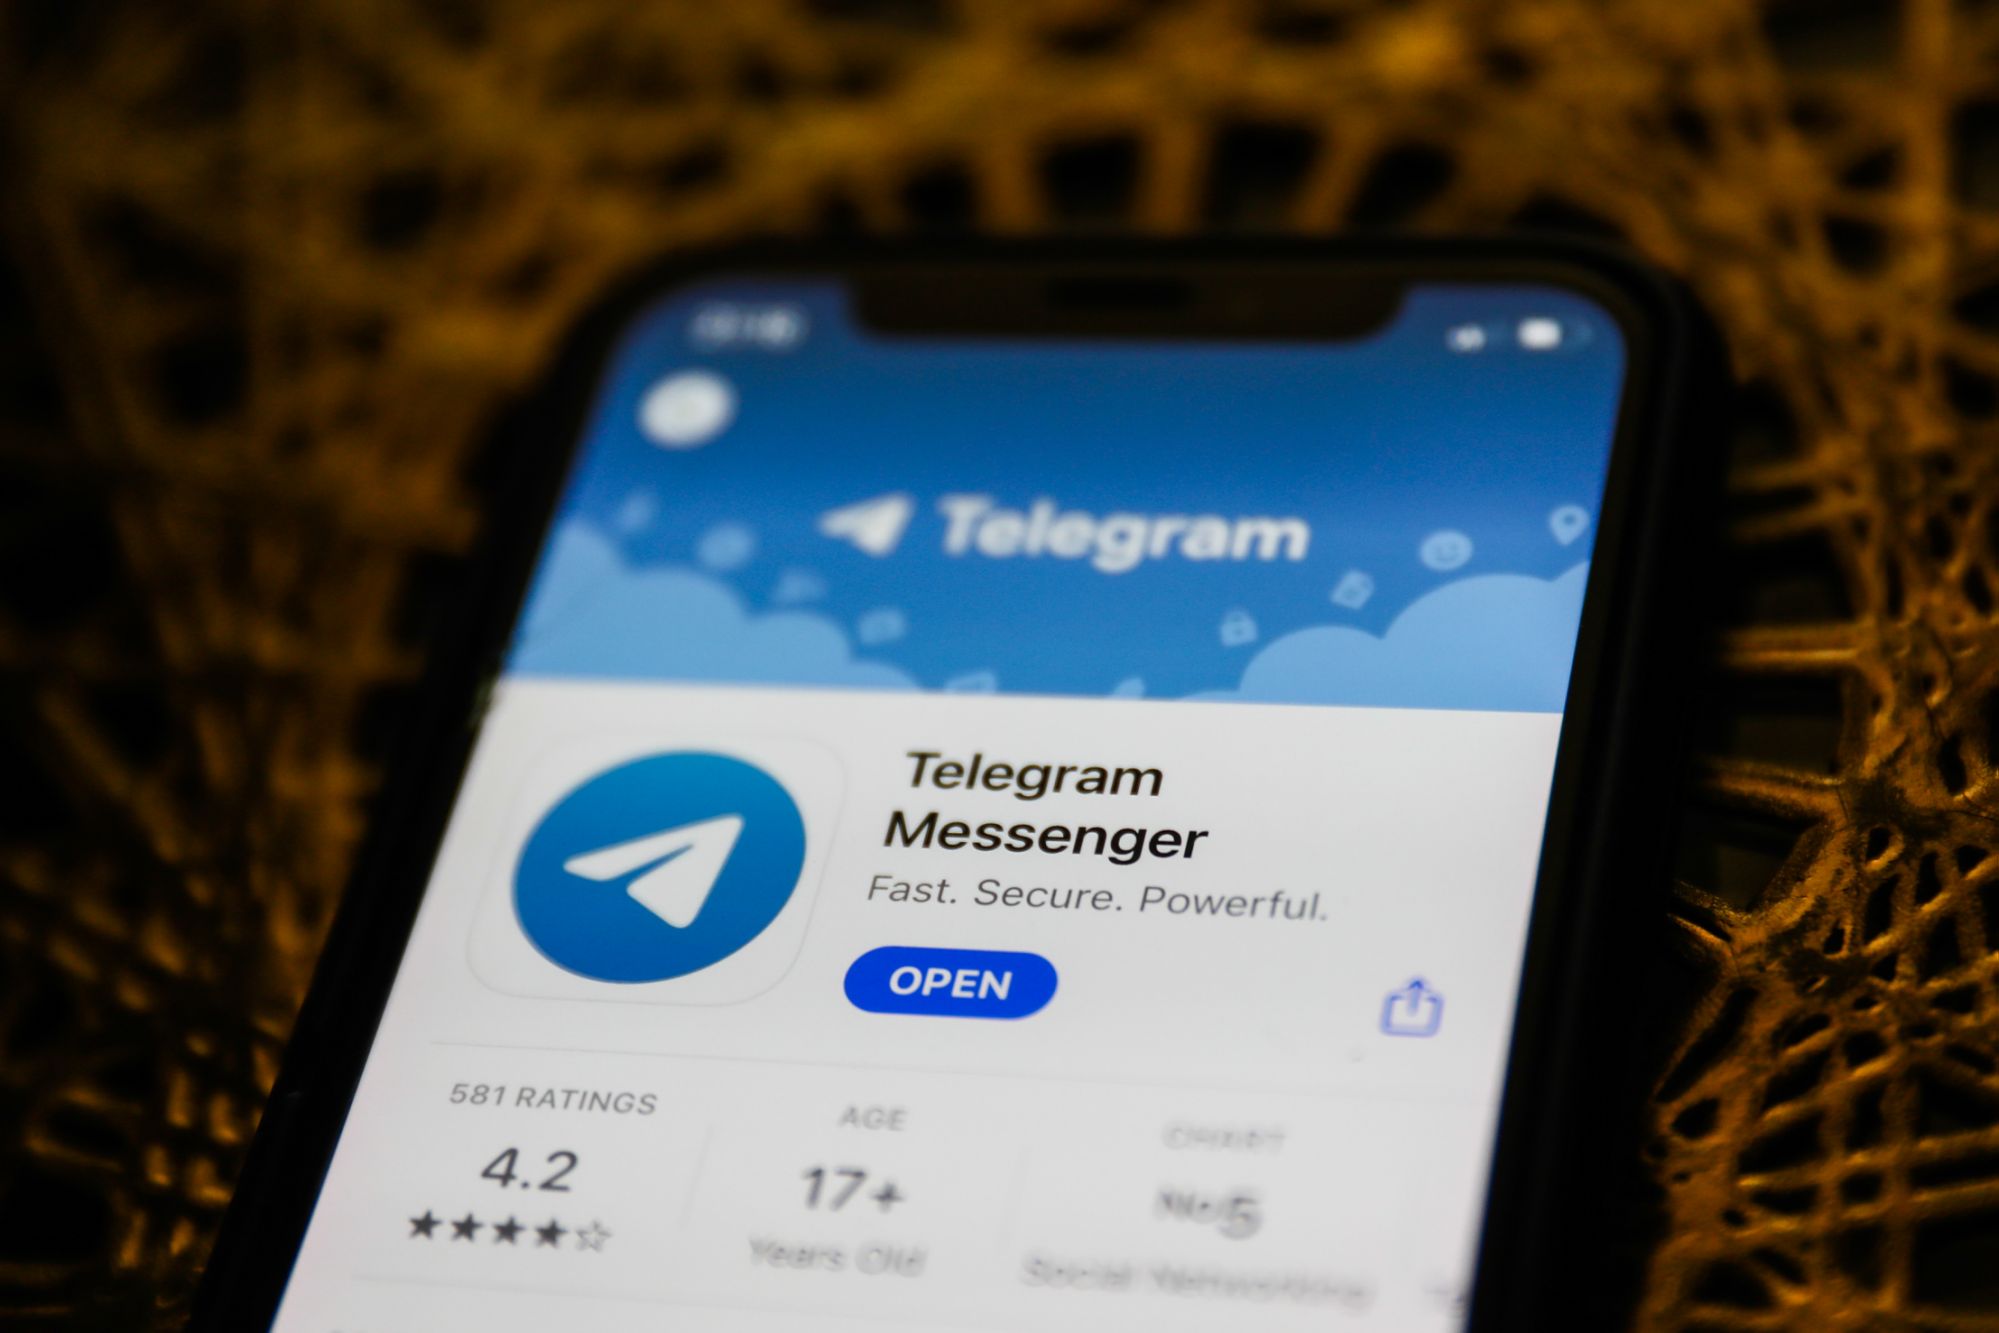 Telegram would now be able to import your WhatsApp chat history